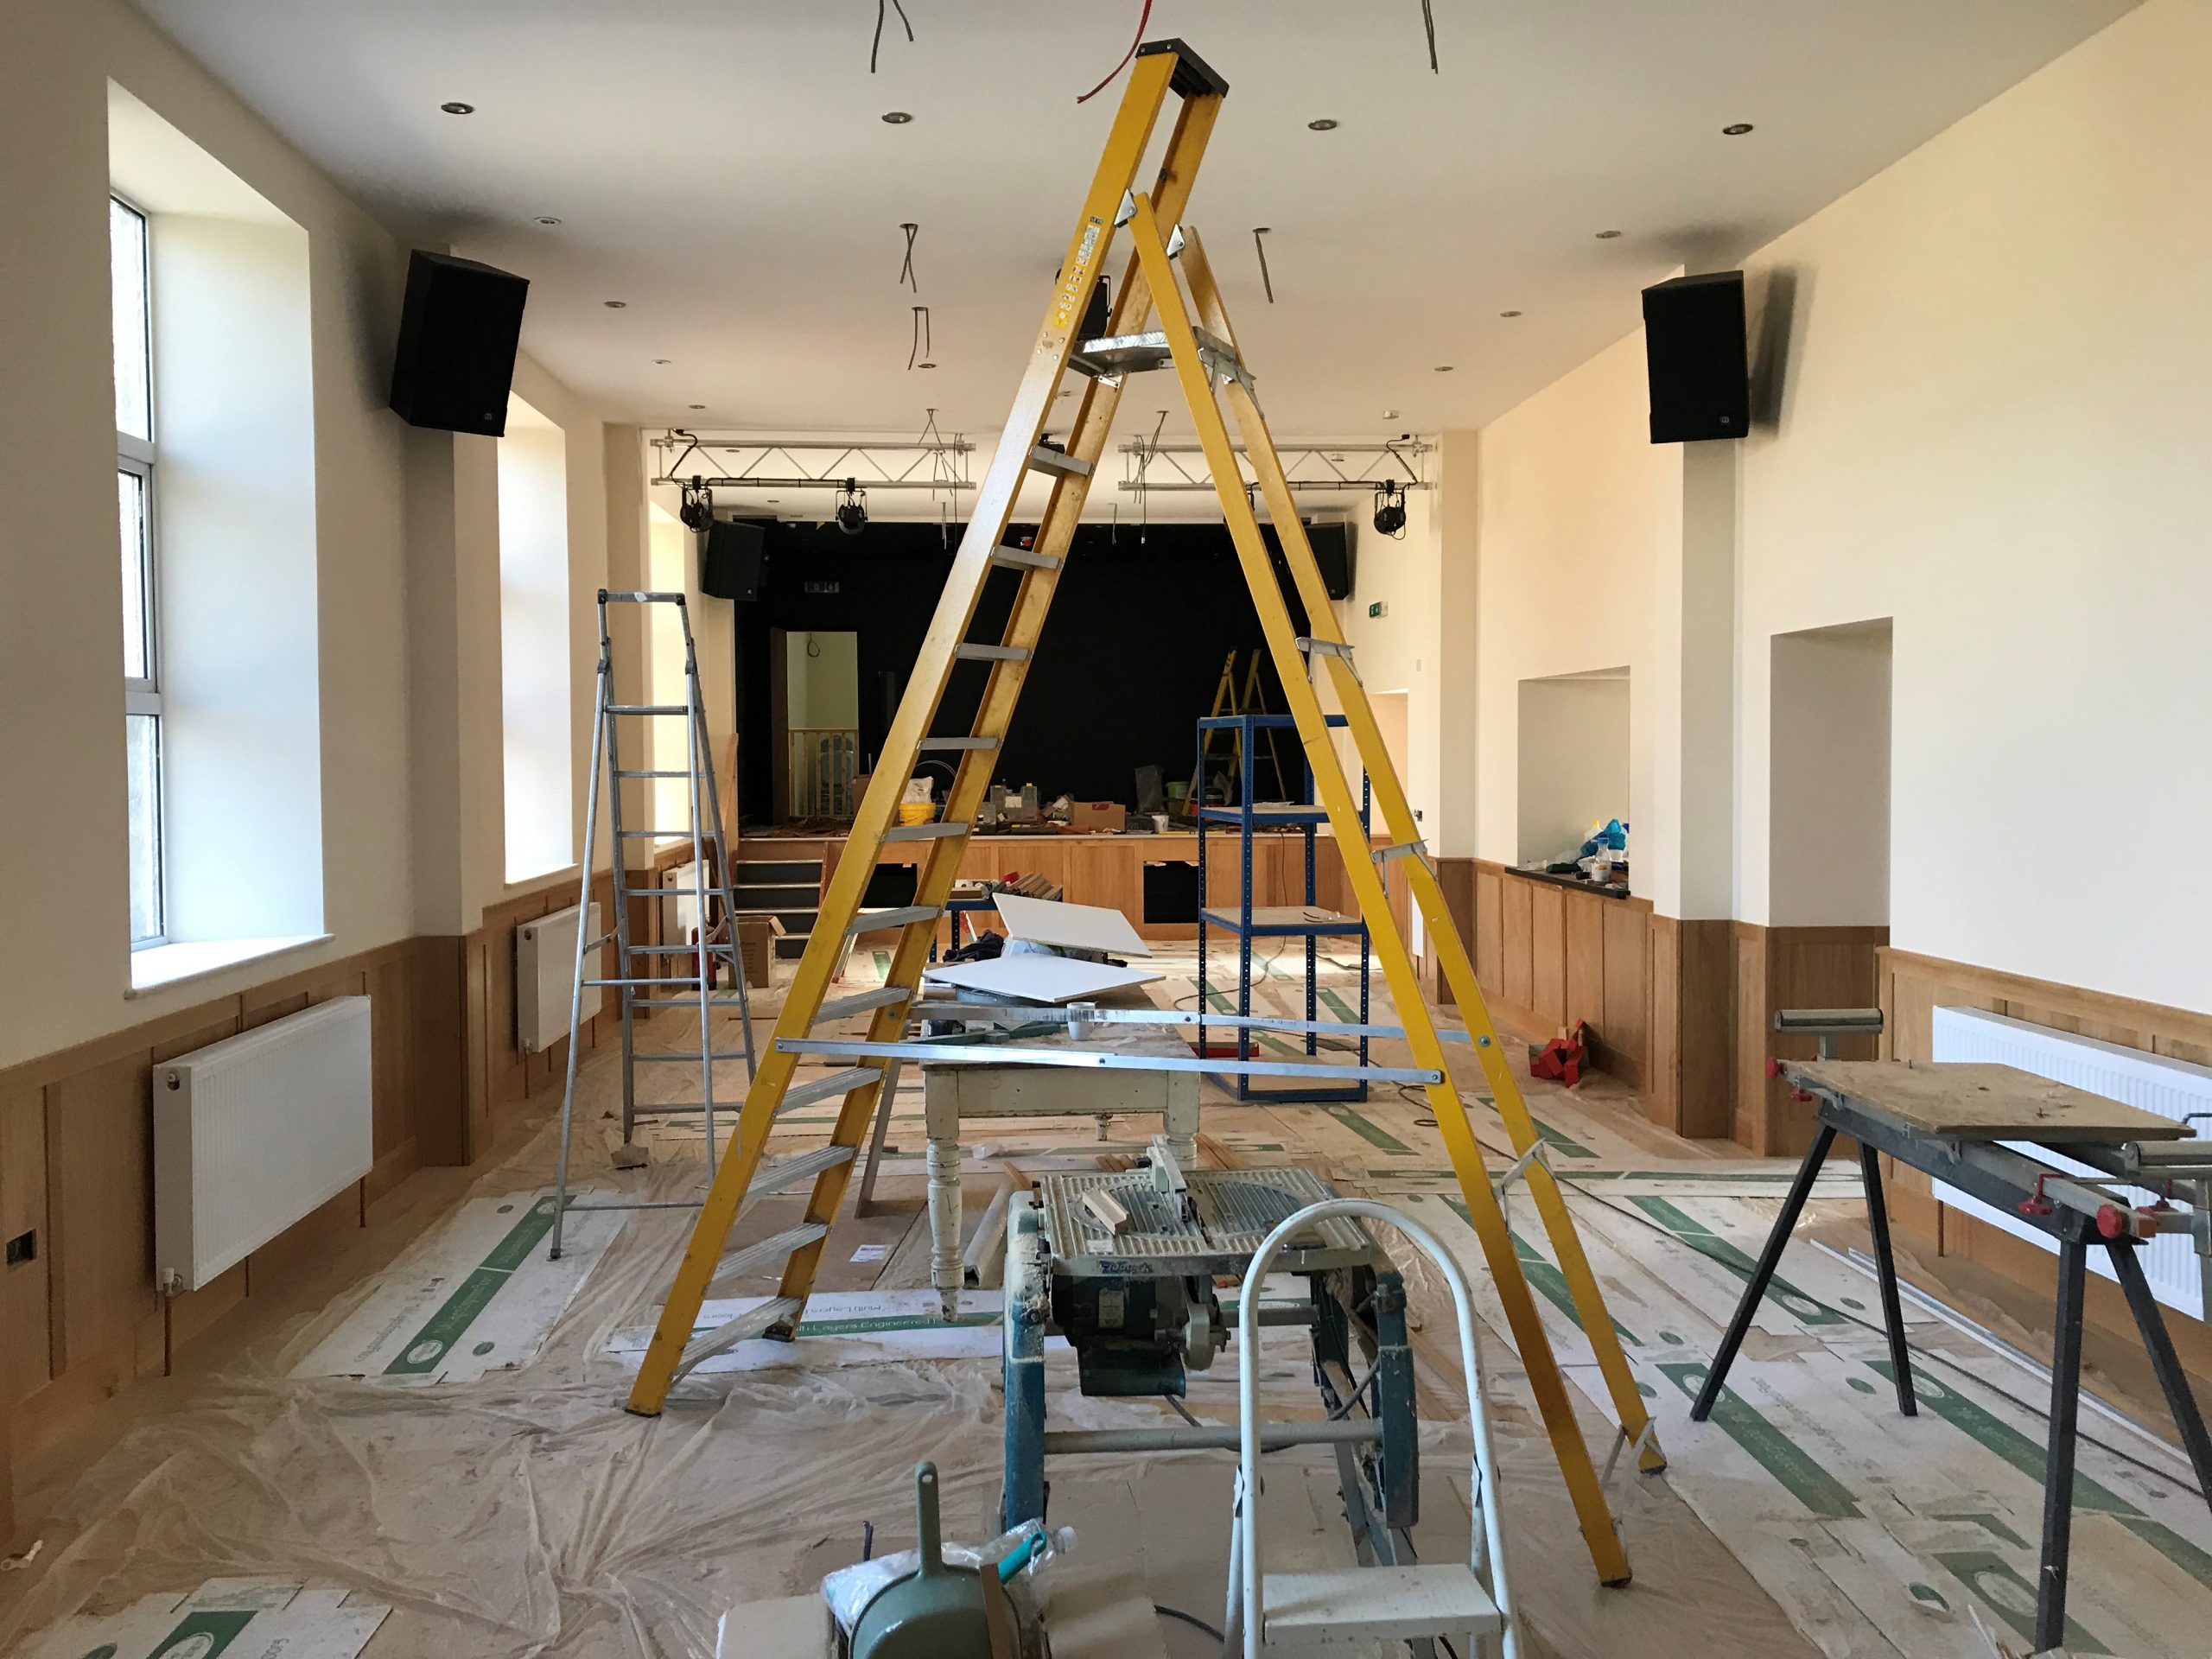 Supply and Design of a full Sound System Installation